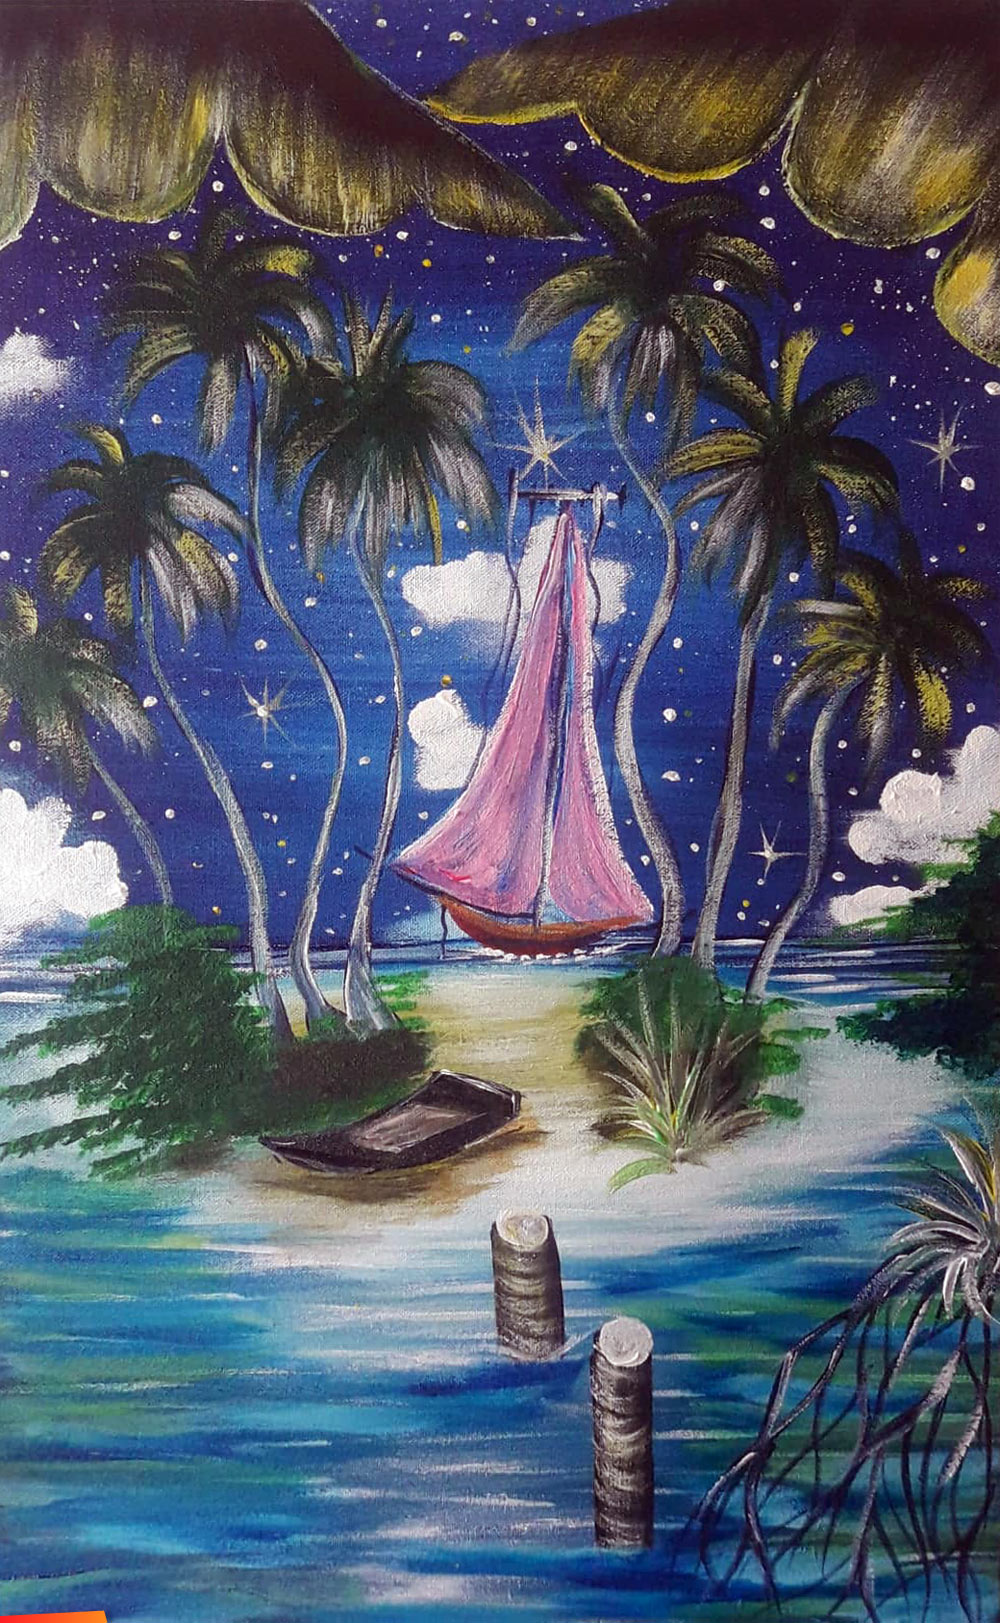 Sailboat by tiny atoll in the starlight, painting by Orlando Garrido